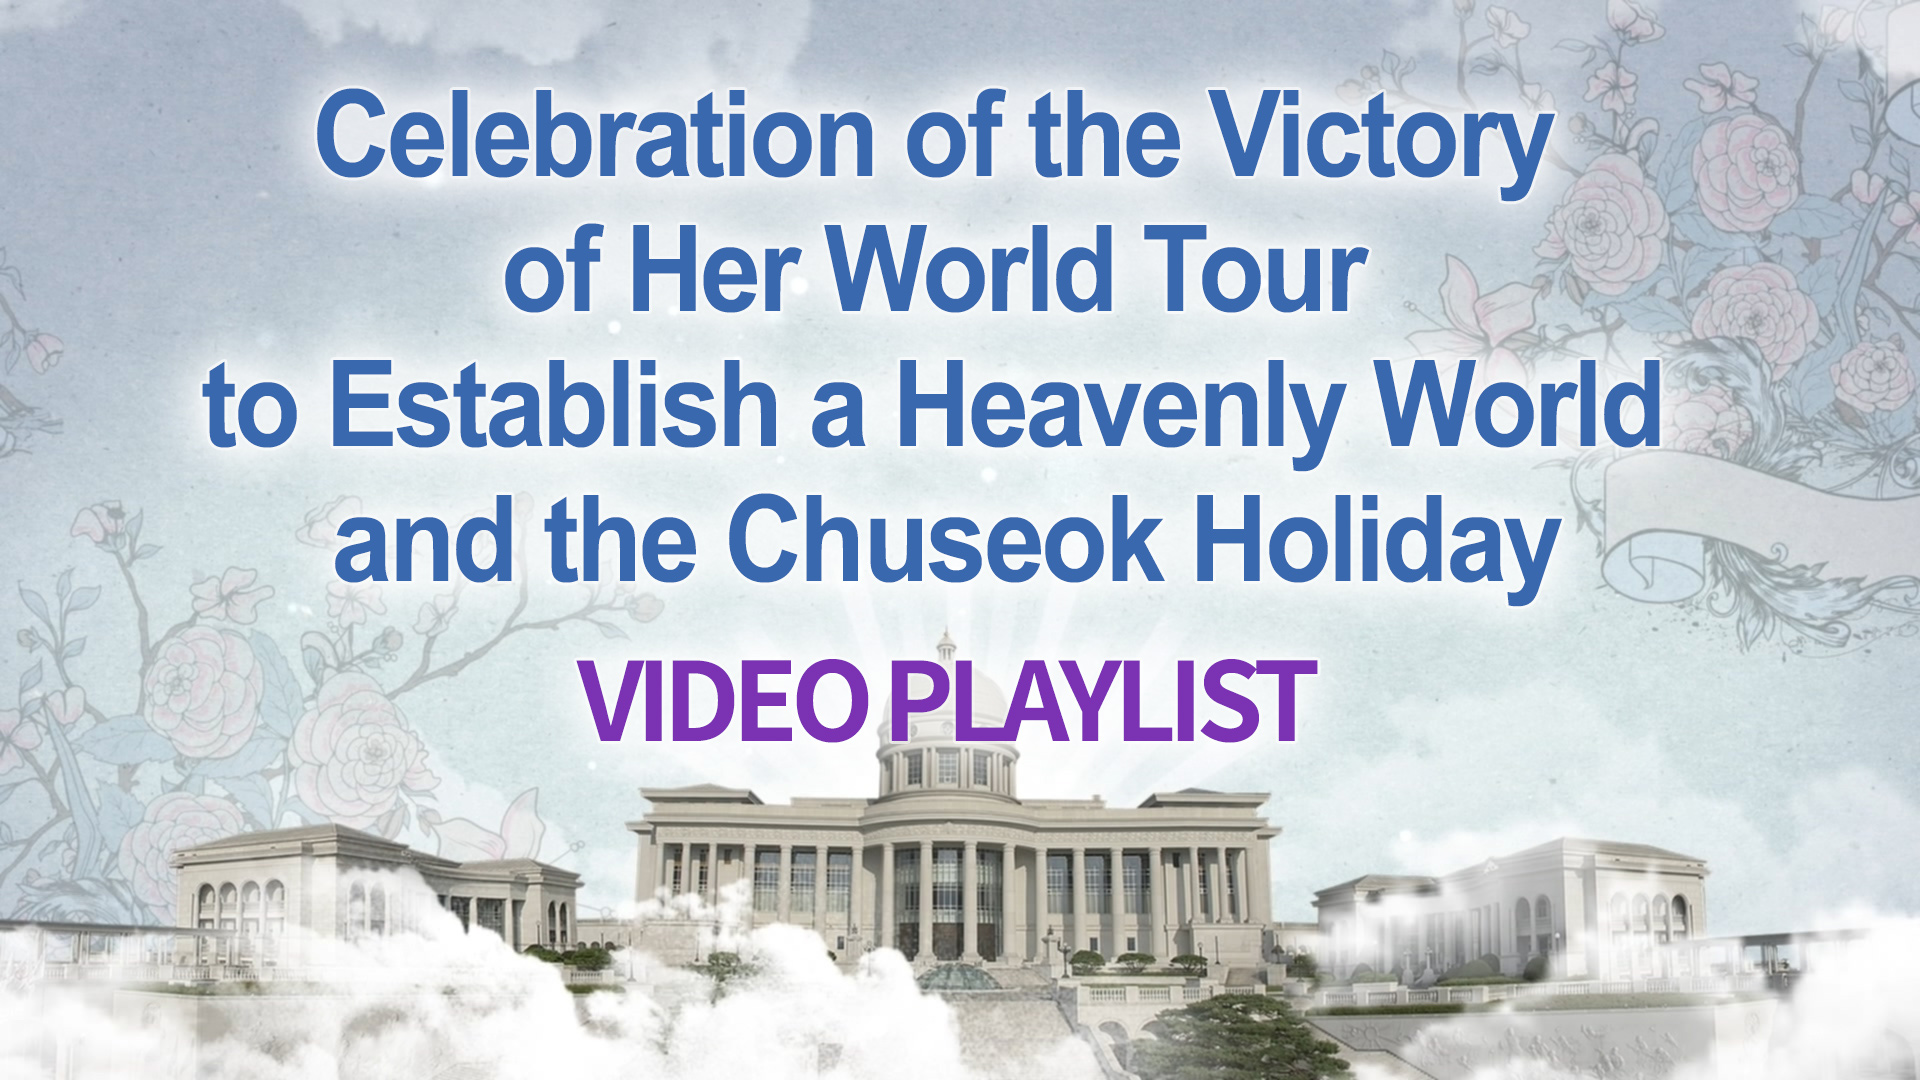 Victory of Her World Tour to Establish a Heavenly World and the Chuseok Holiday